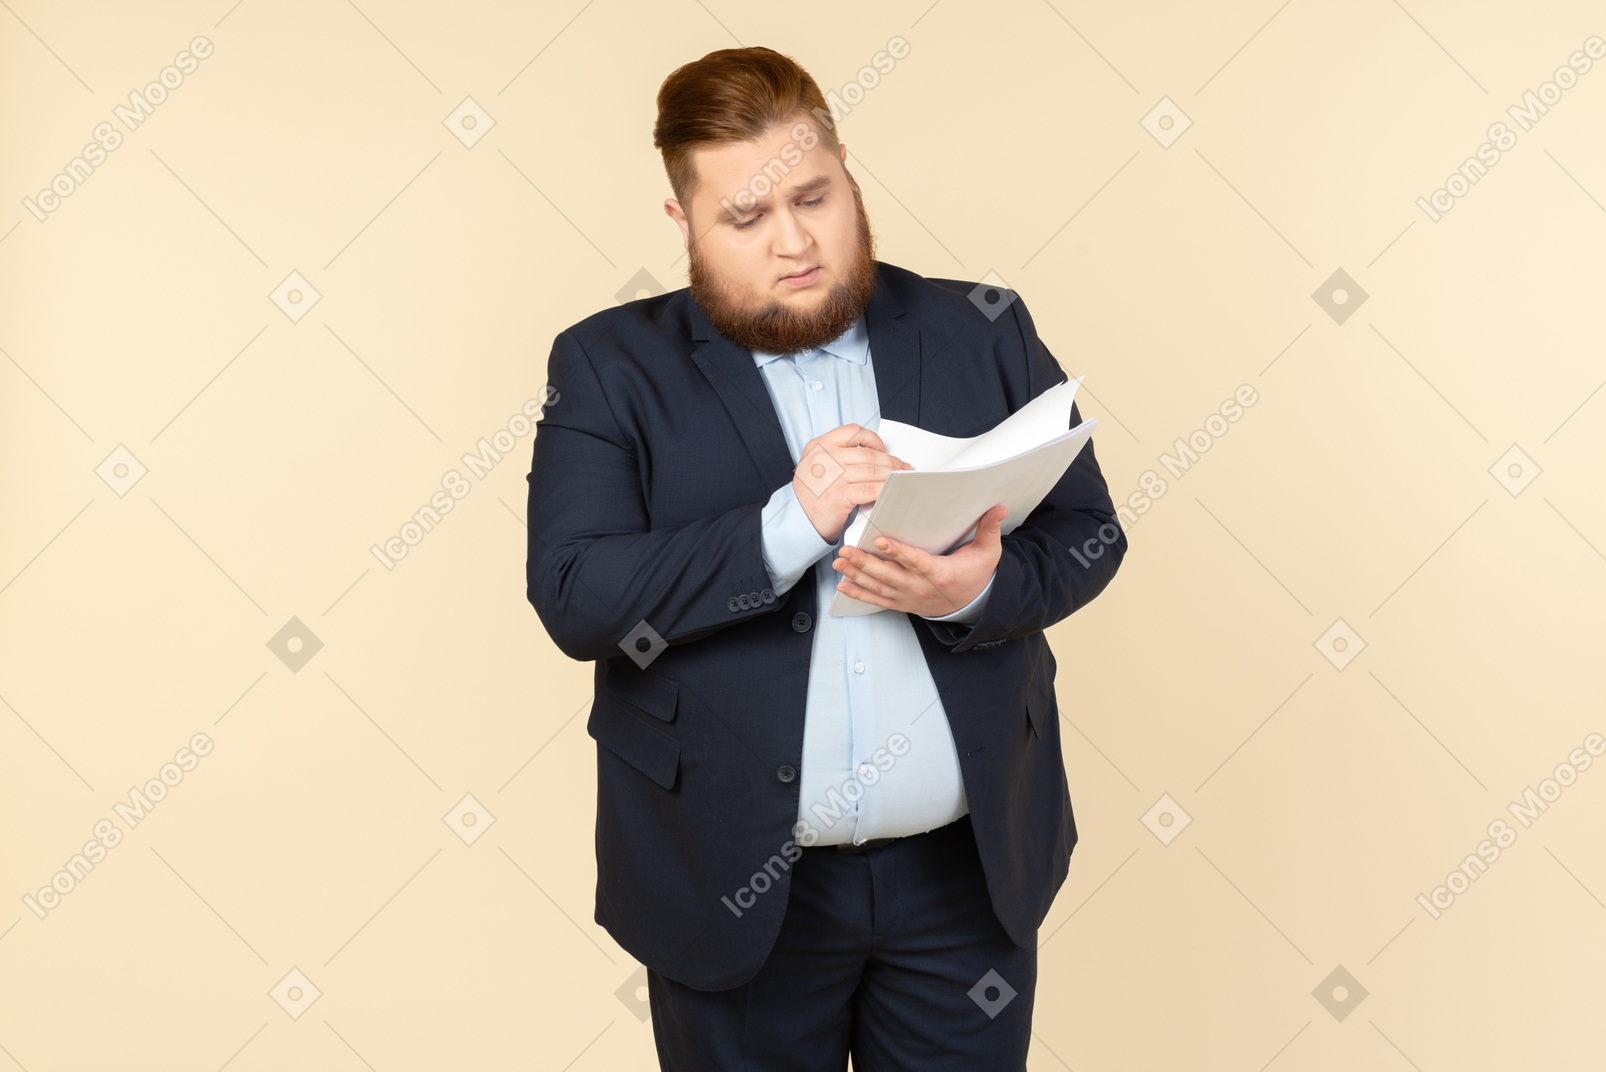 Overweight male office worker revising documents